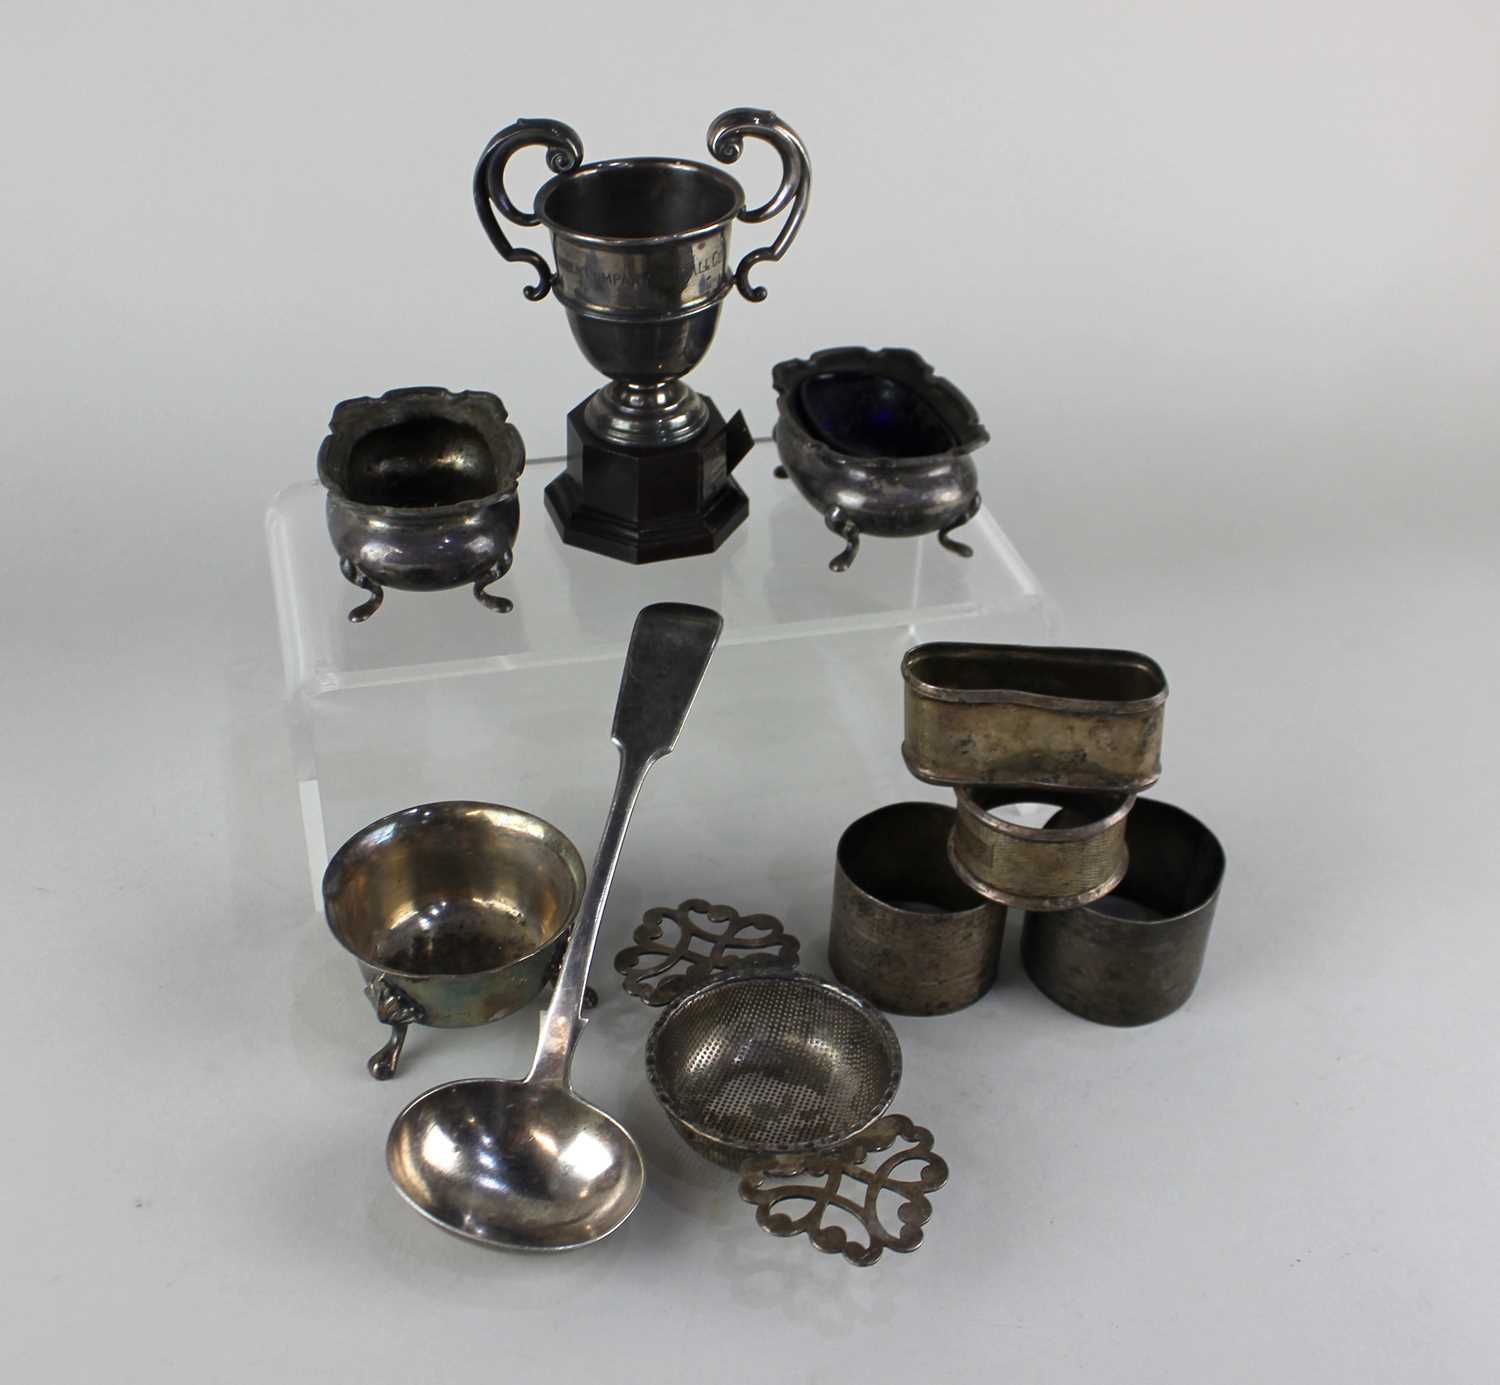 A modern silver tea strainer and stand pair of oval cruets (one with blue glass liner), a small